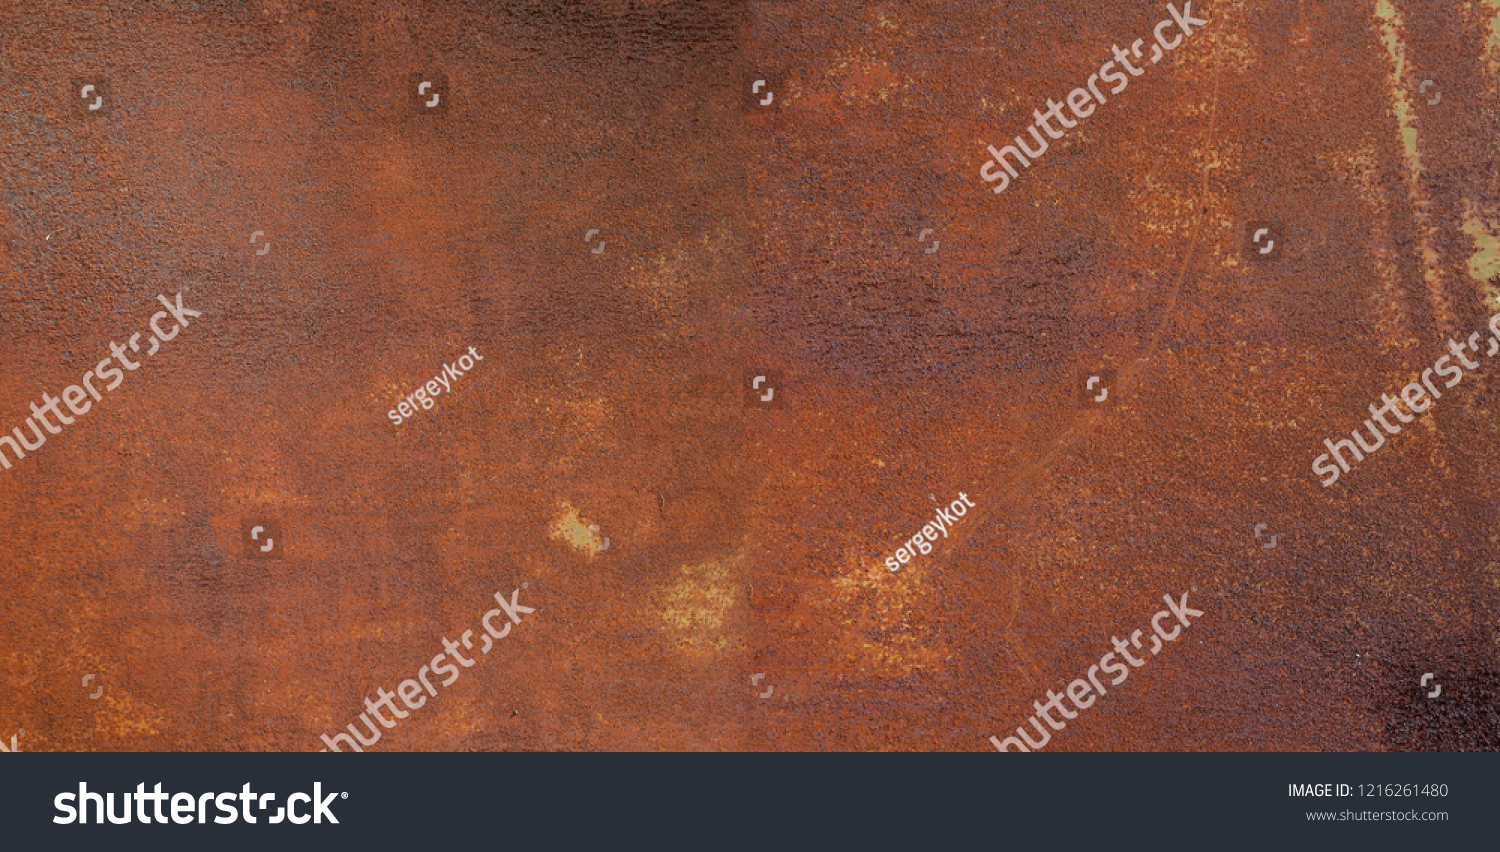 Panorama of rusty metal wall, old sheet of iron covered with rust and corrosion paint. Oxidized iron panel. Texture or background. #1216261480